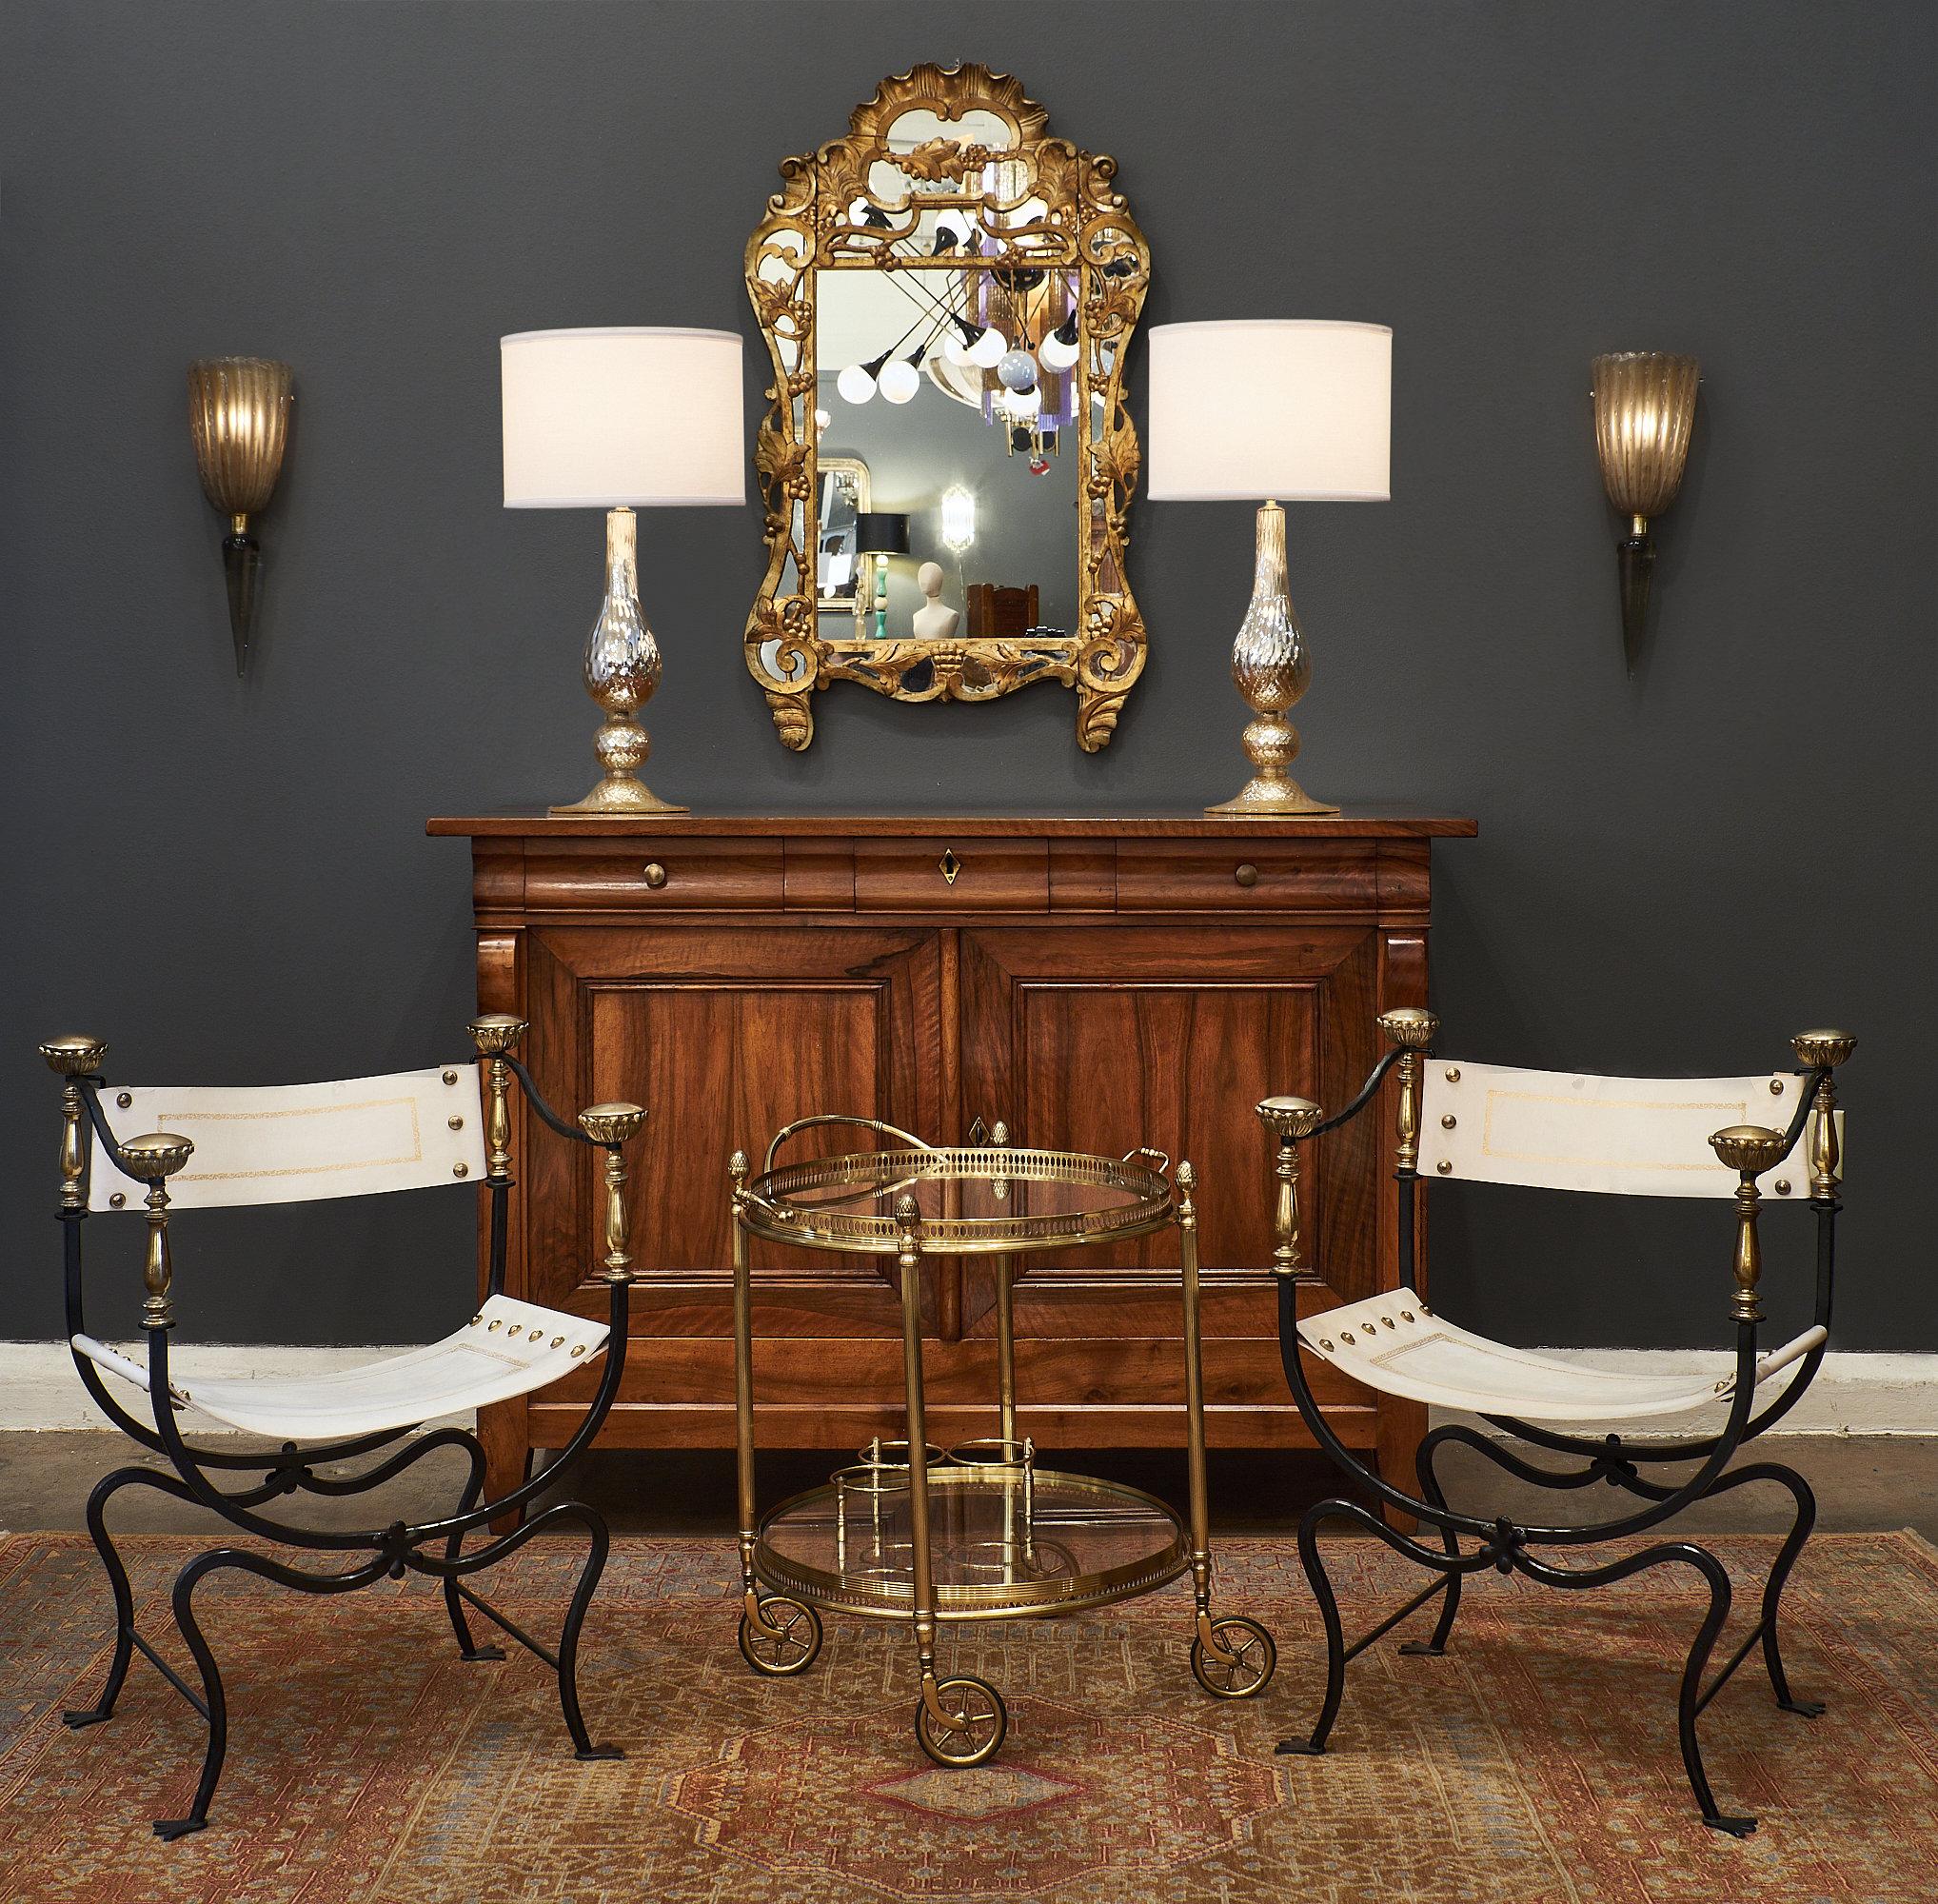 A rare and important set of eight Italian Renaissance style Savonarola armchairs of hand-hammered iron featuring gilt embossed leather seats. We loved the floral details on the finials, the brass nailheads, and the overall decorative impact of the